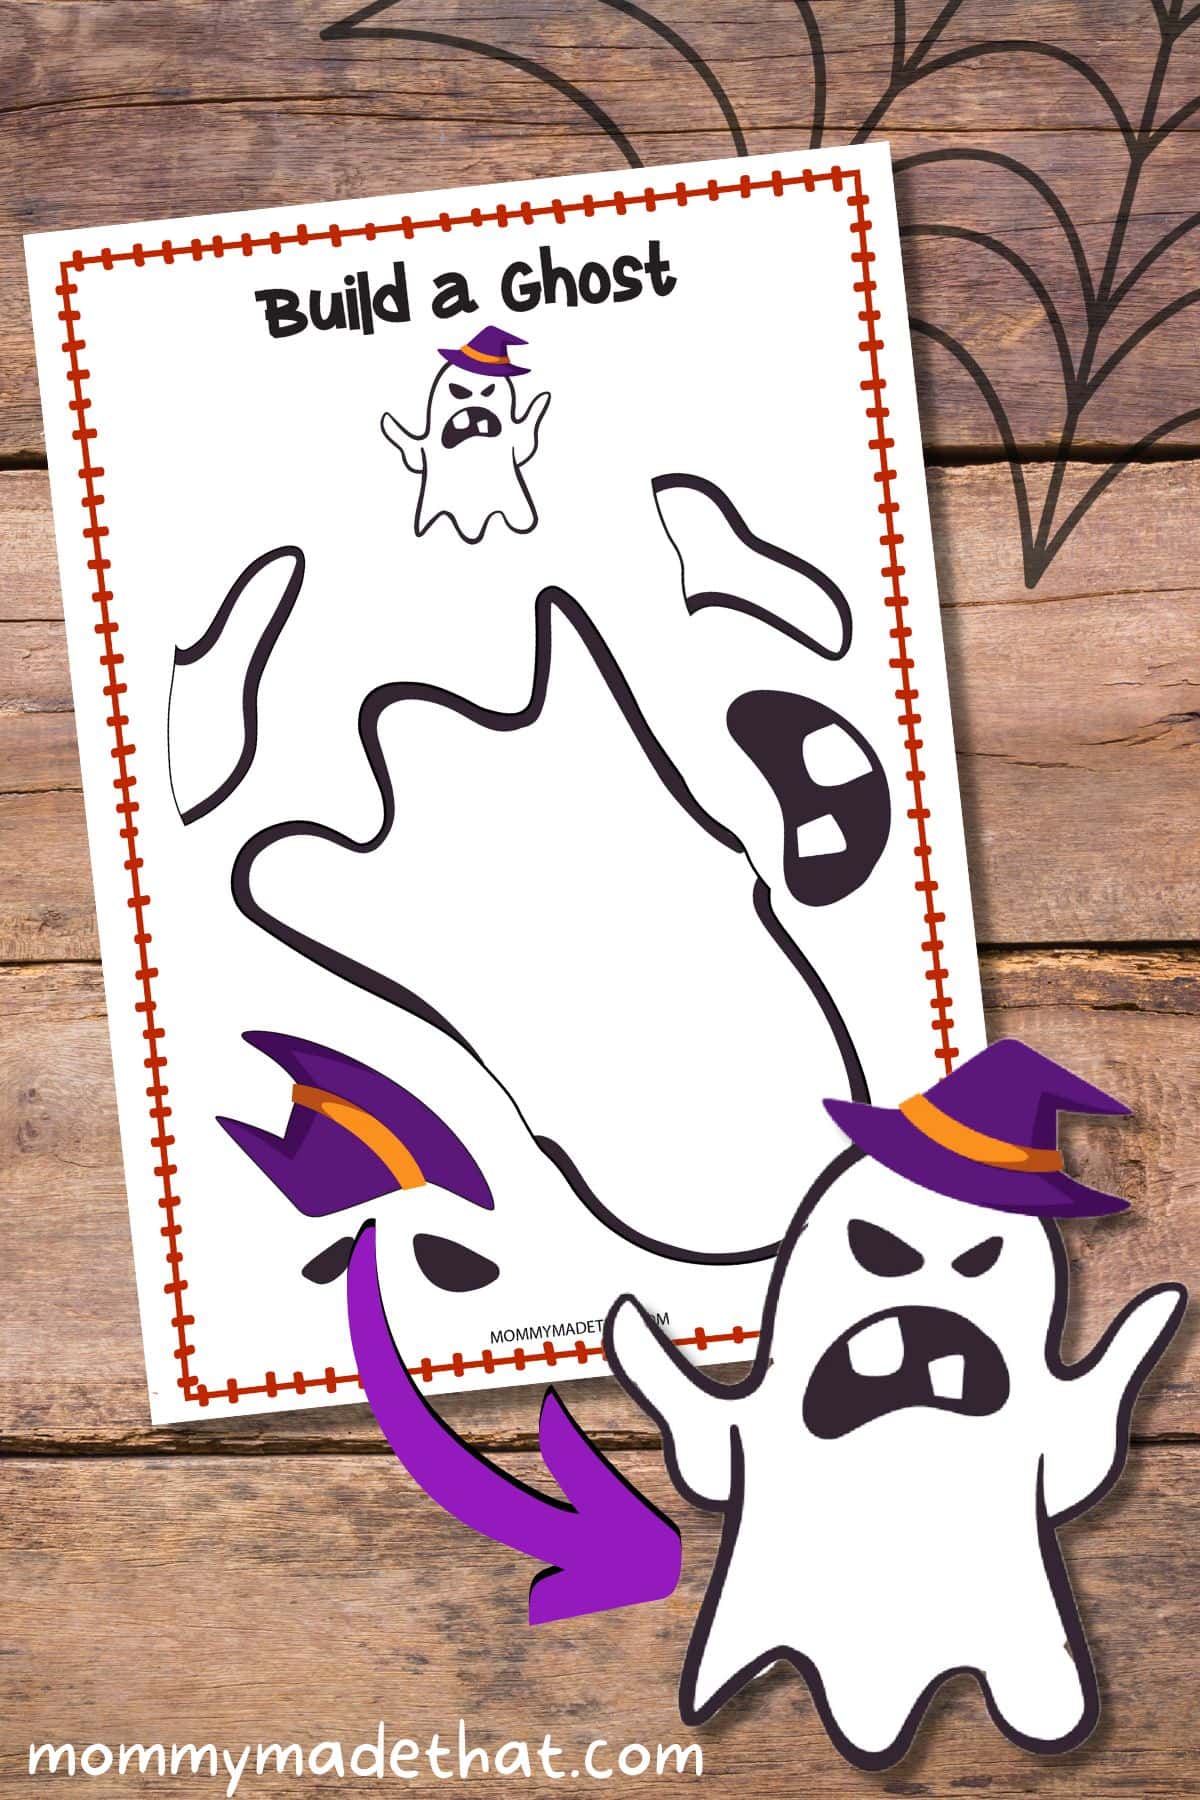 Build a Ghost Printout (Free Printable Template Perfect for Halloween)